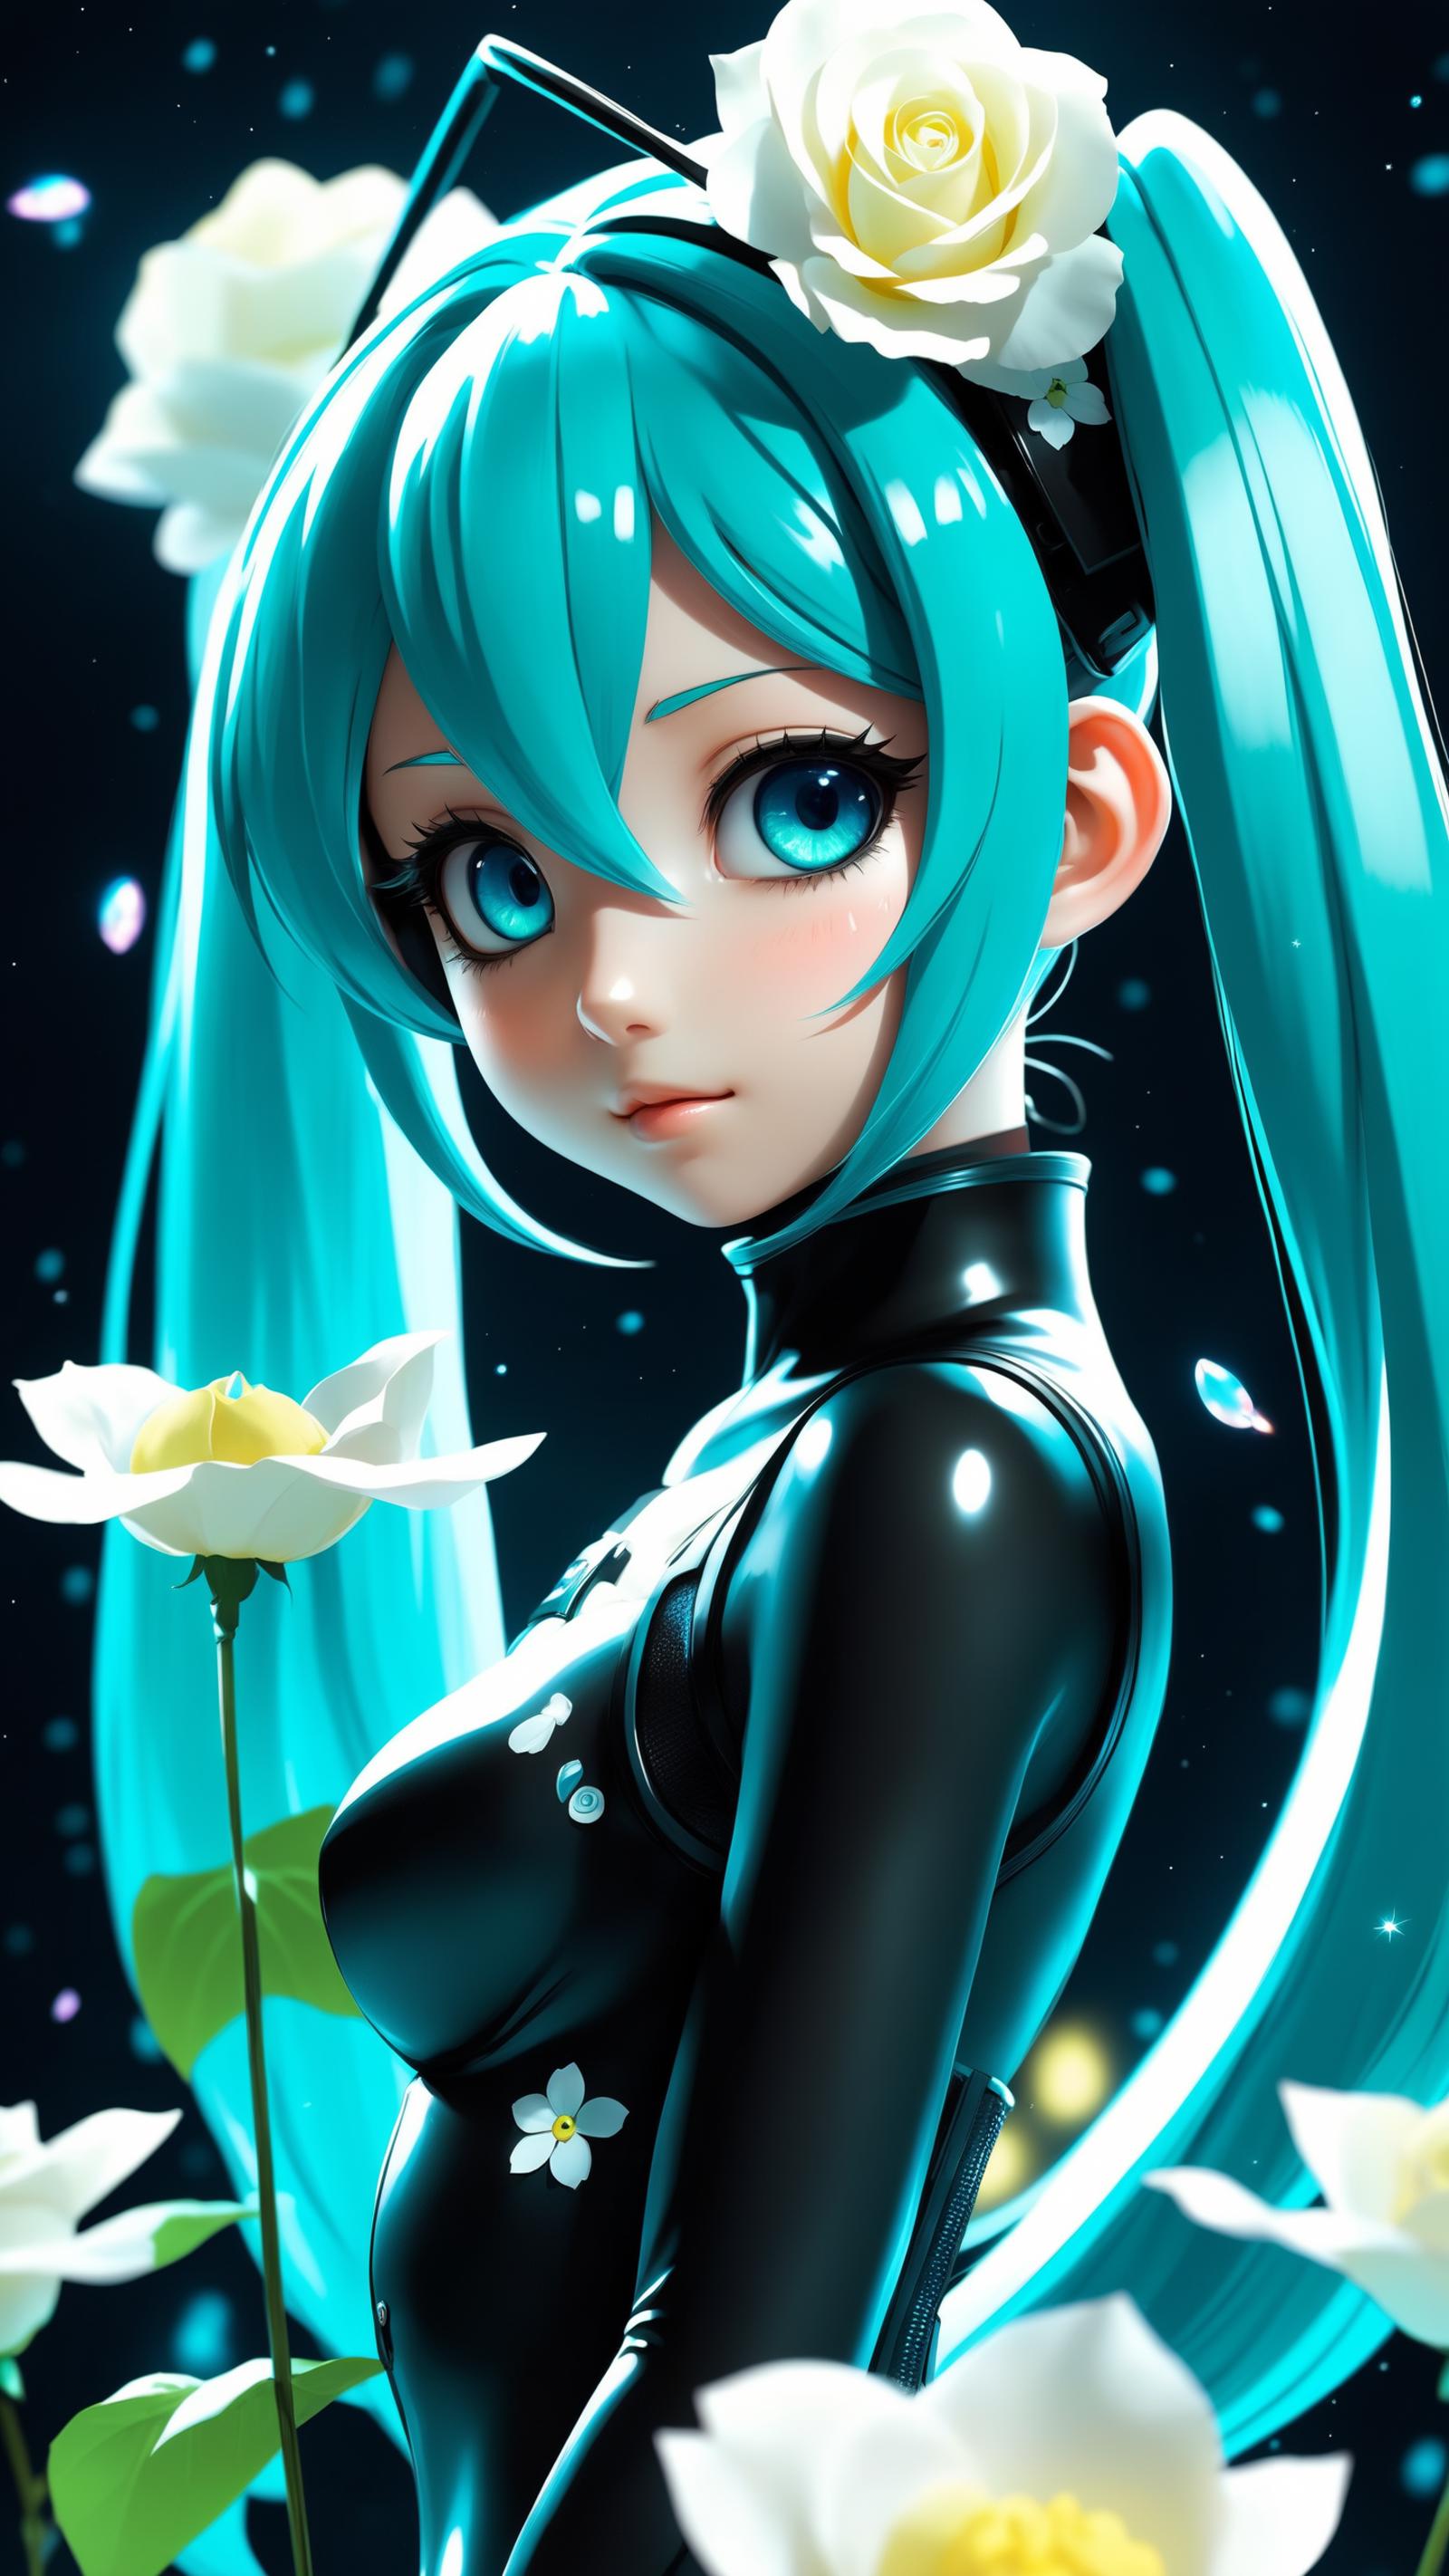 A blue-haired anime girl in a black leotard holding a flower.